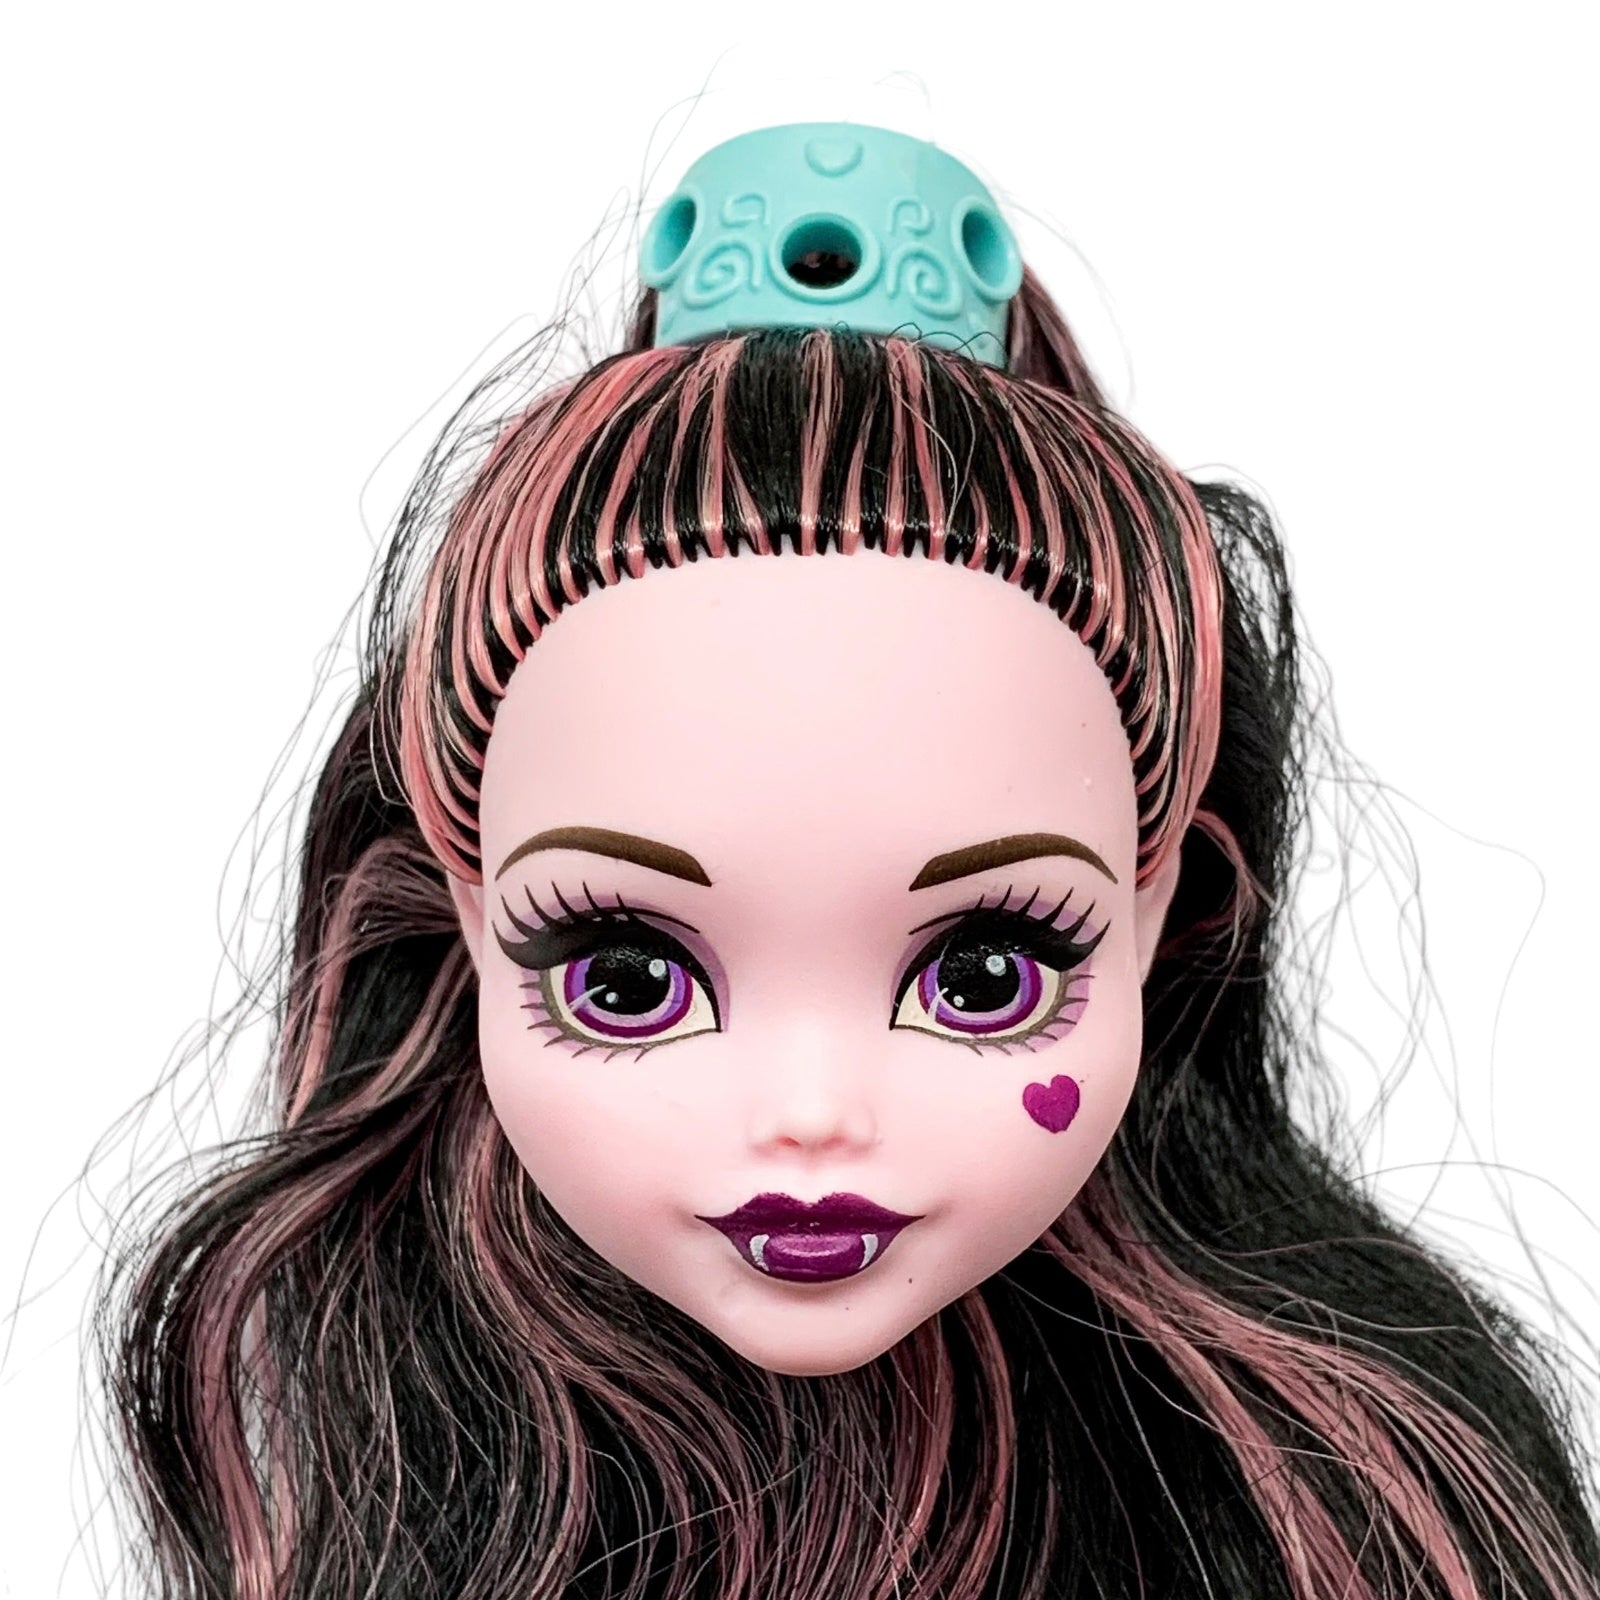 Monster High Draculaura Boo York Edition Doll With Dress Outfit – The  Serendipity Doll Boutique